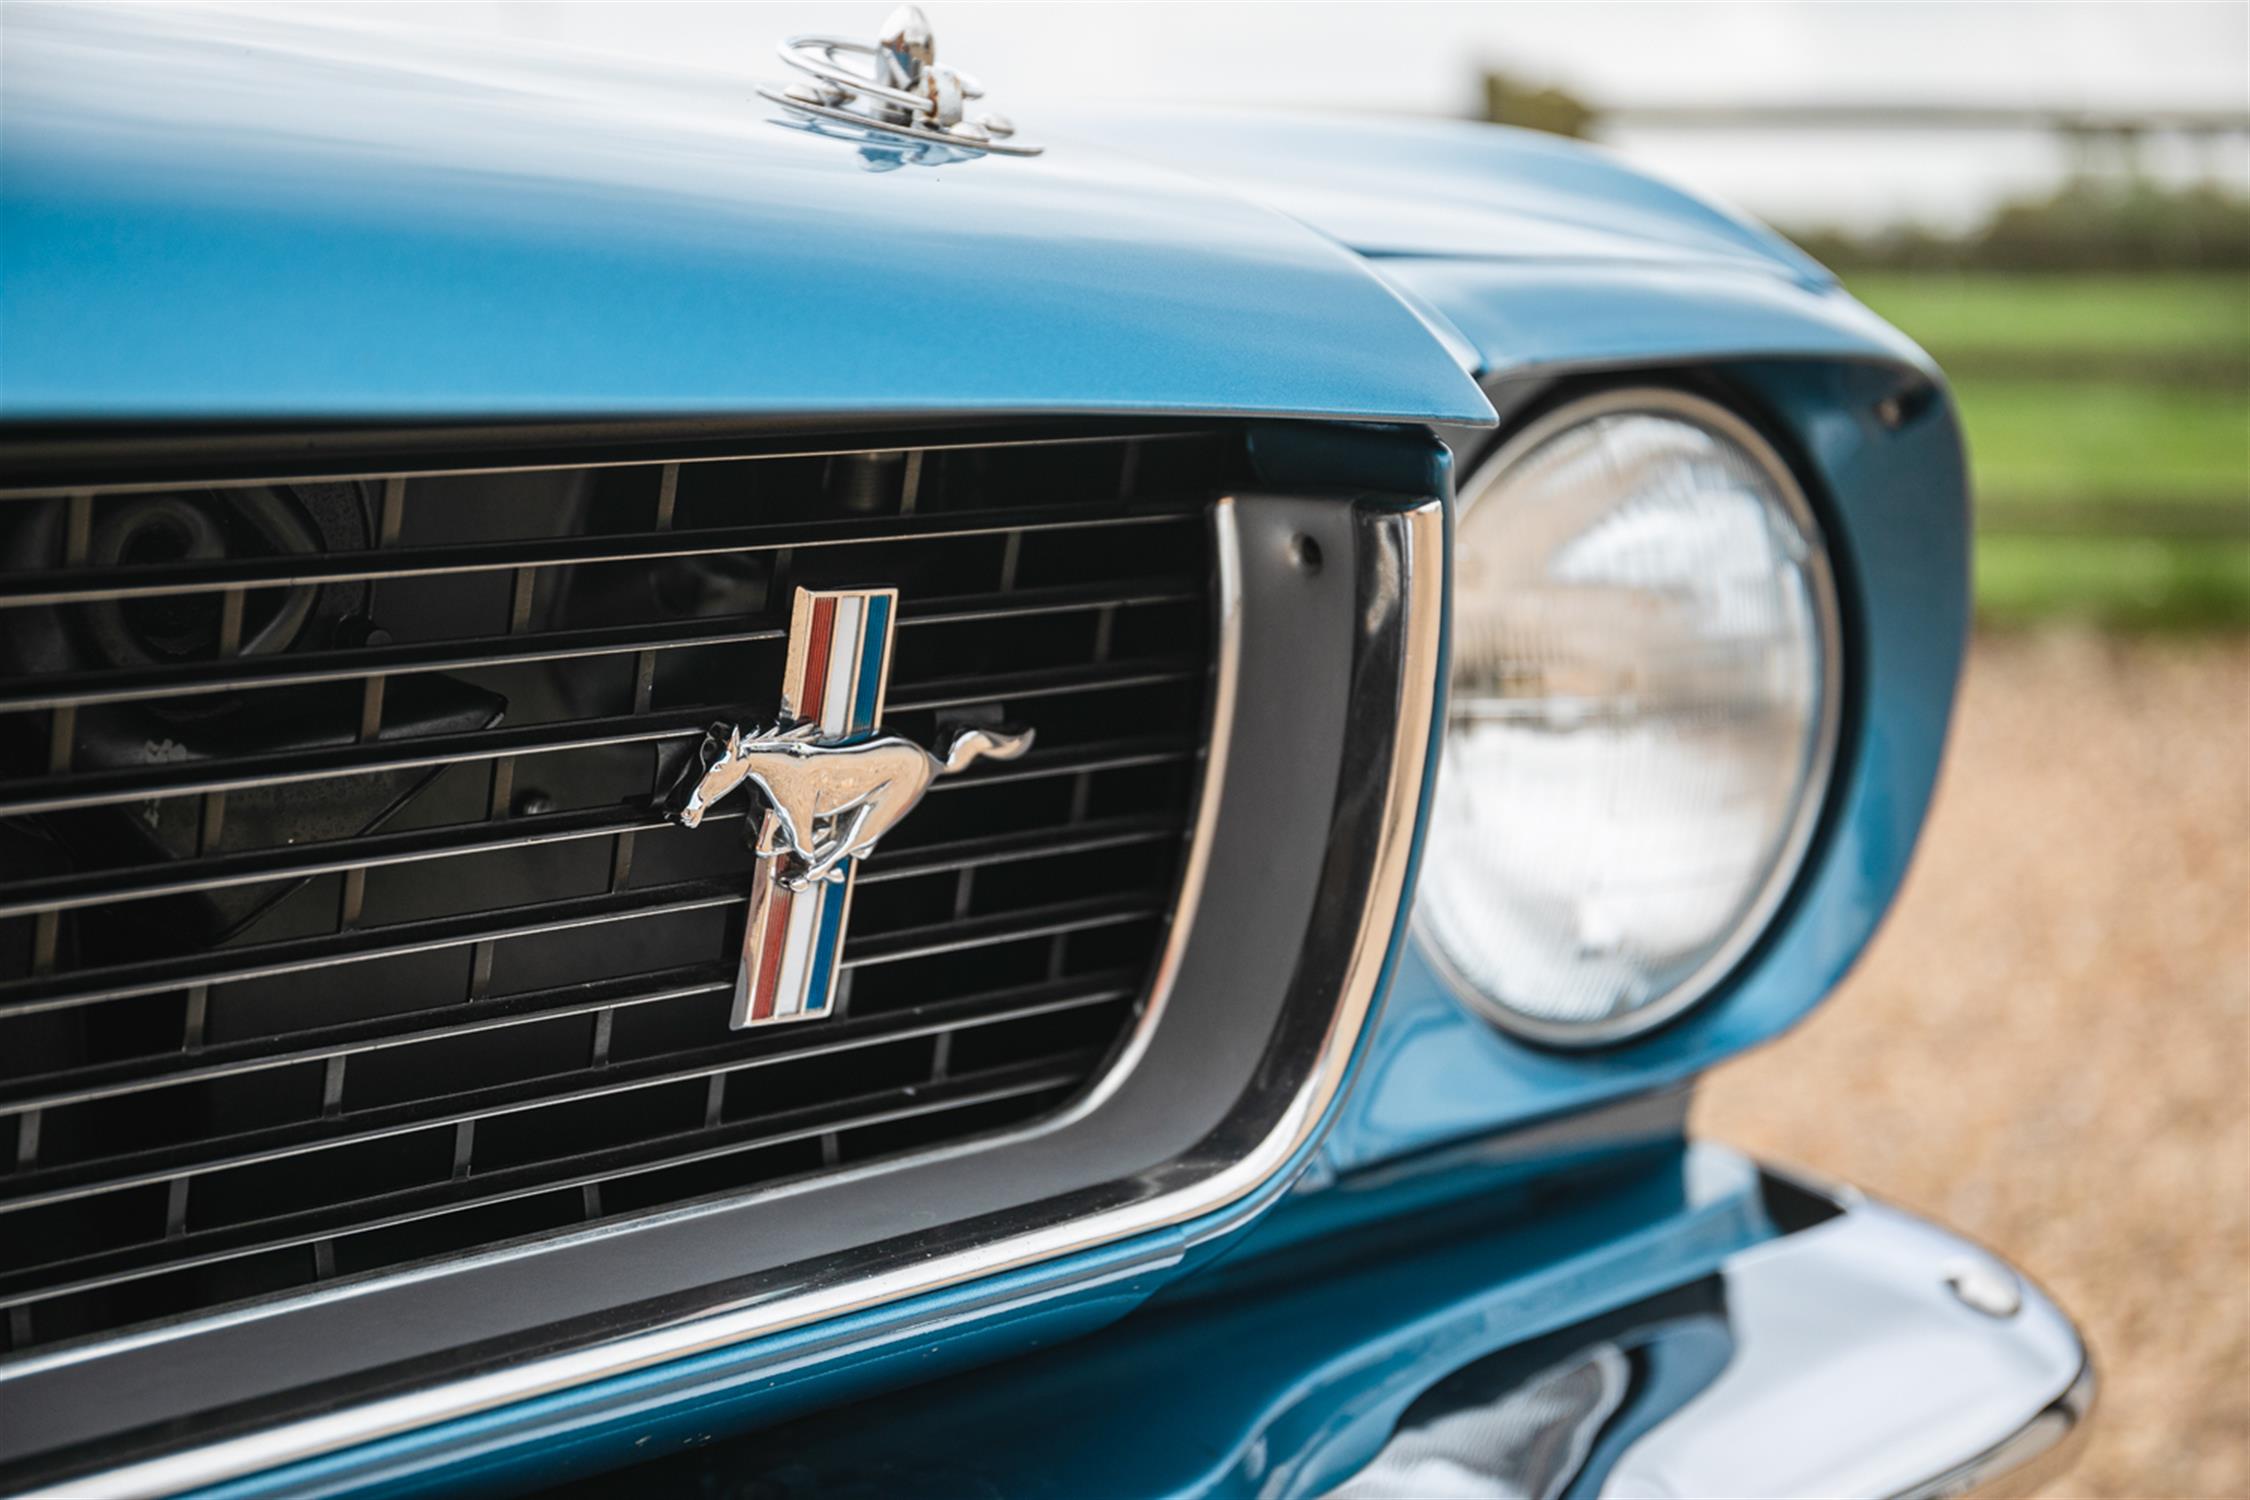 1966 Ford Shelby Mustang GT350 - Image 10 of 10